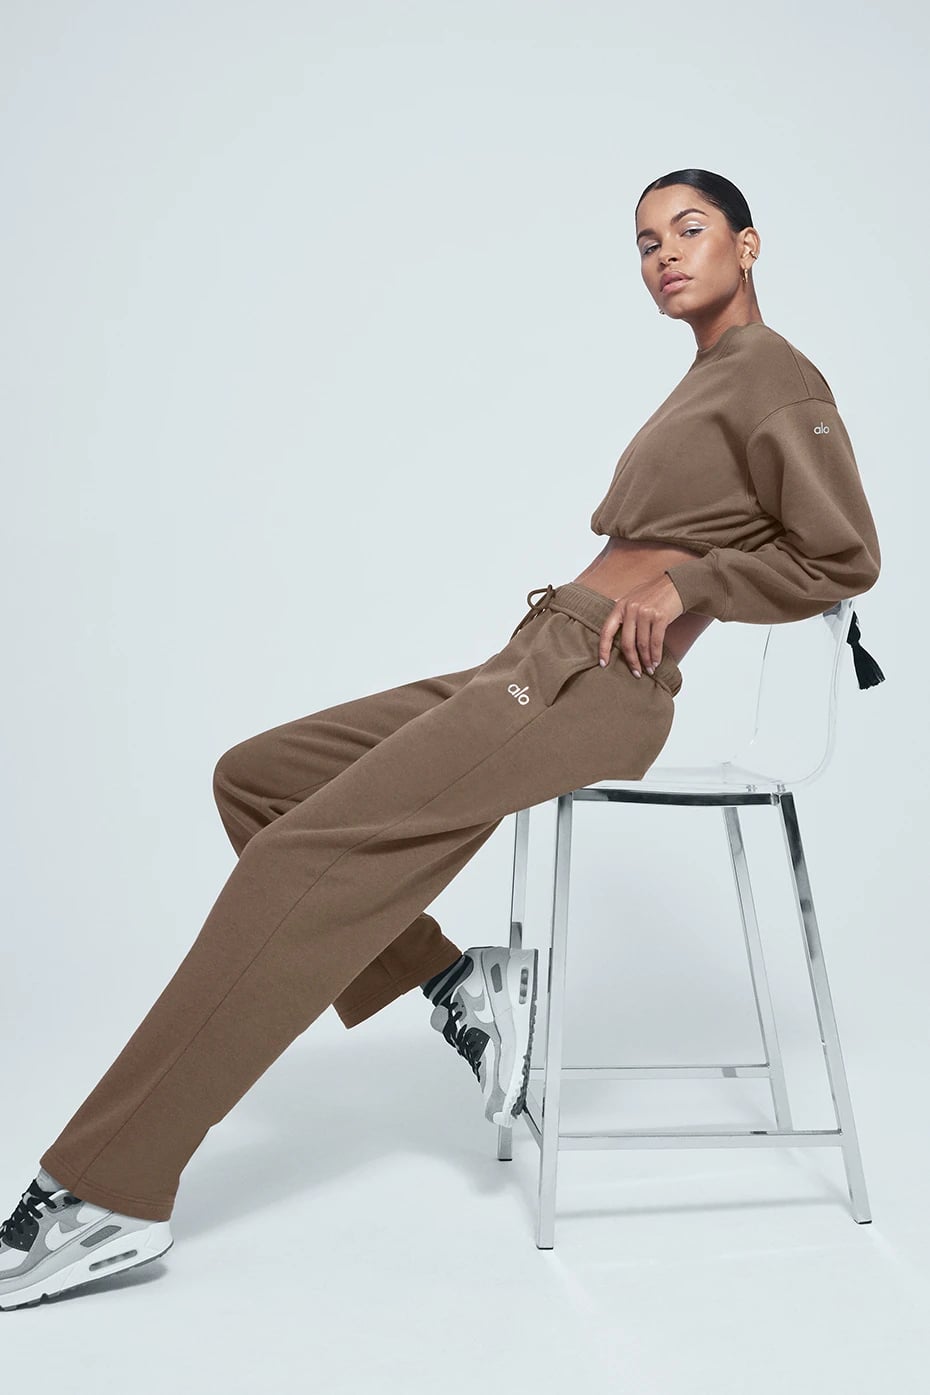 A Neutral Sweat Set: Alo Muse Hoodie and Sweatpant